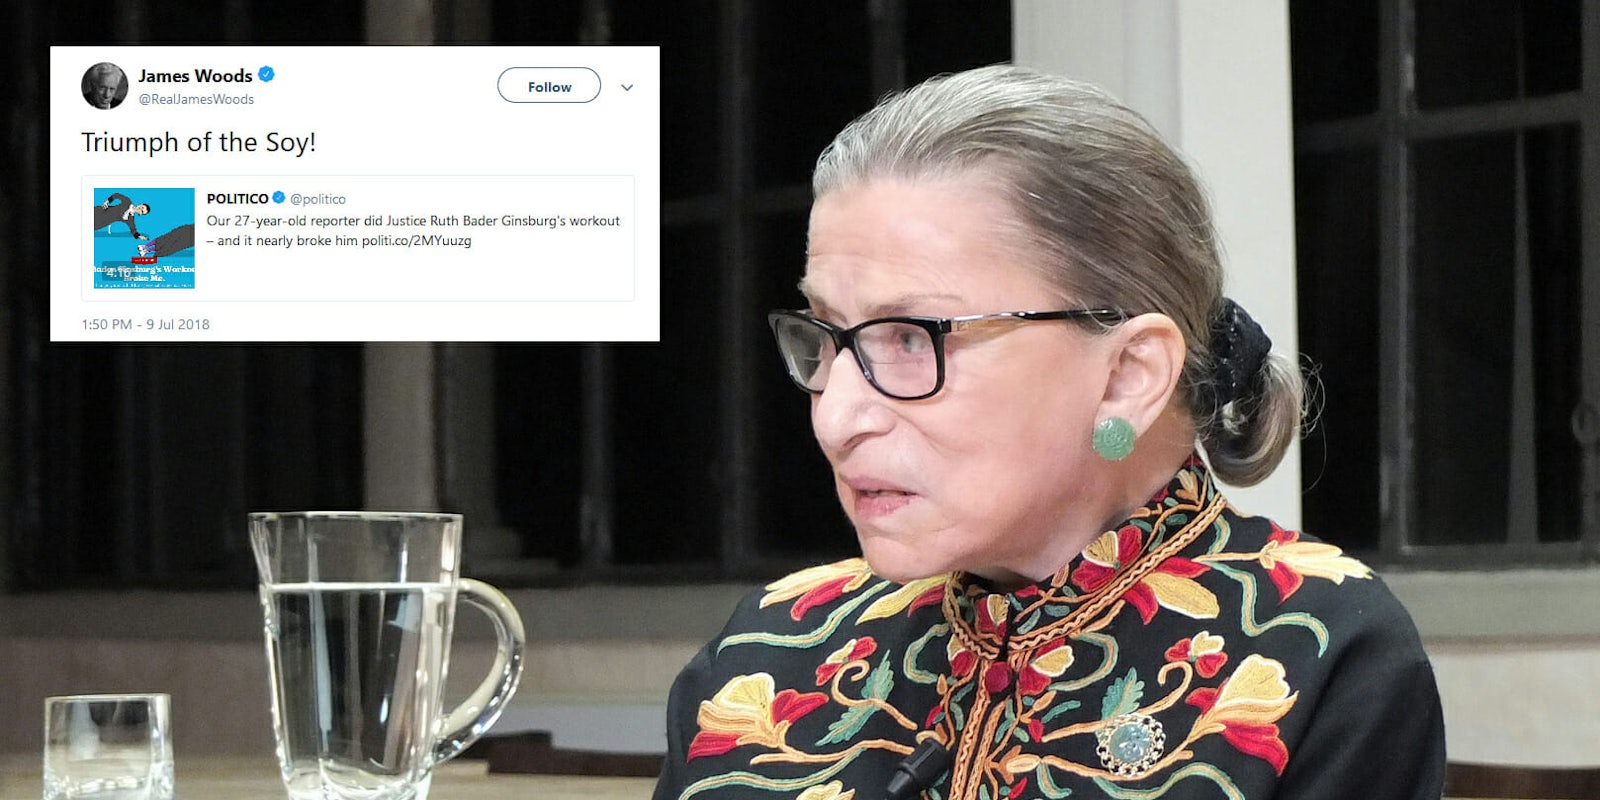 Conservatives are mocking a reporter and the workout routine of Supreme Court Justice Ruth Bader Ginsburg after Politco shared an old story.